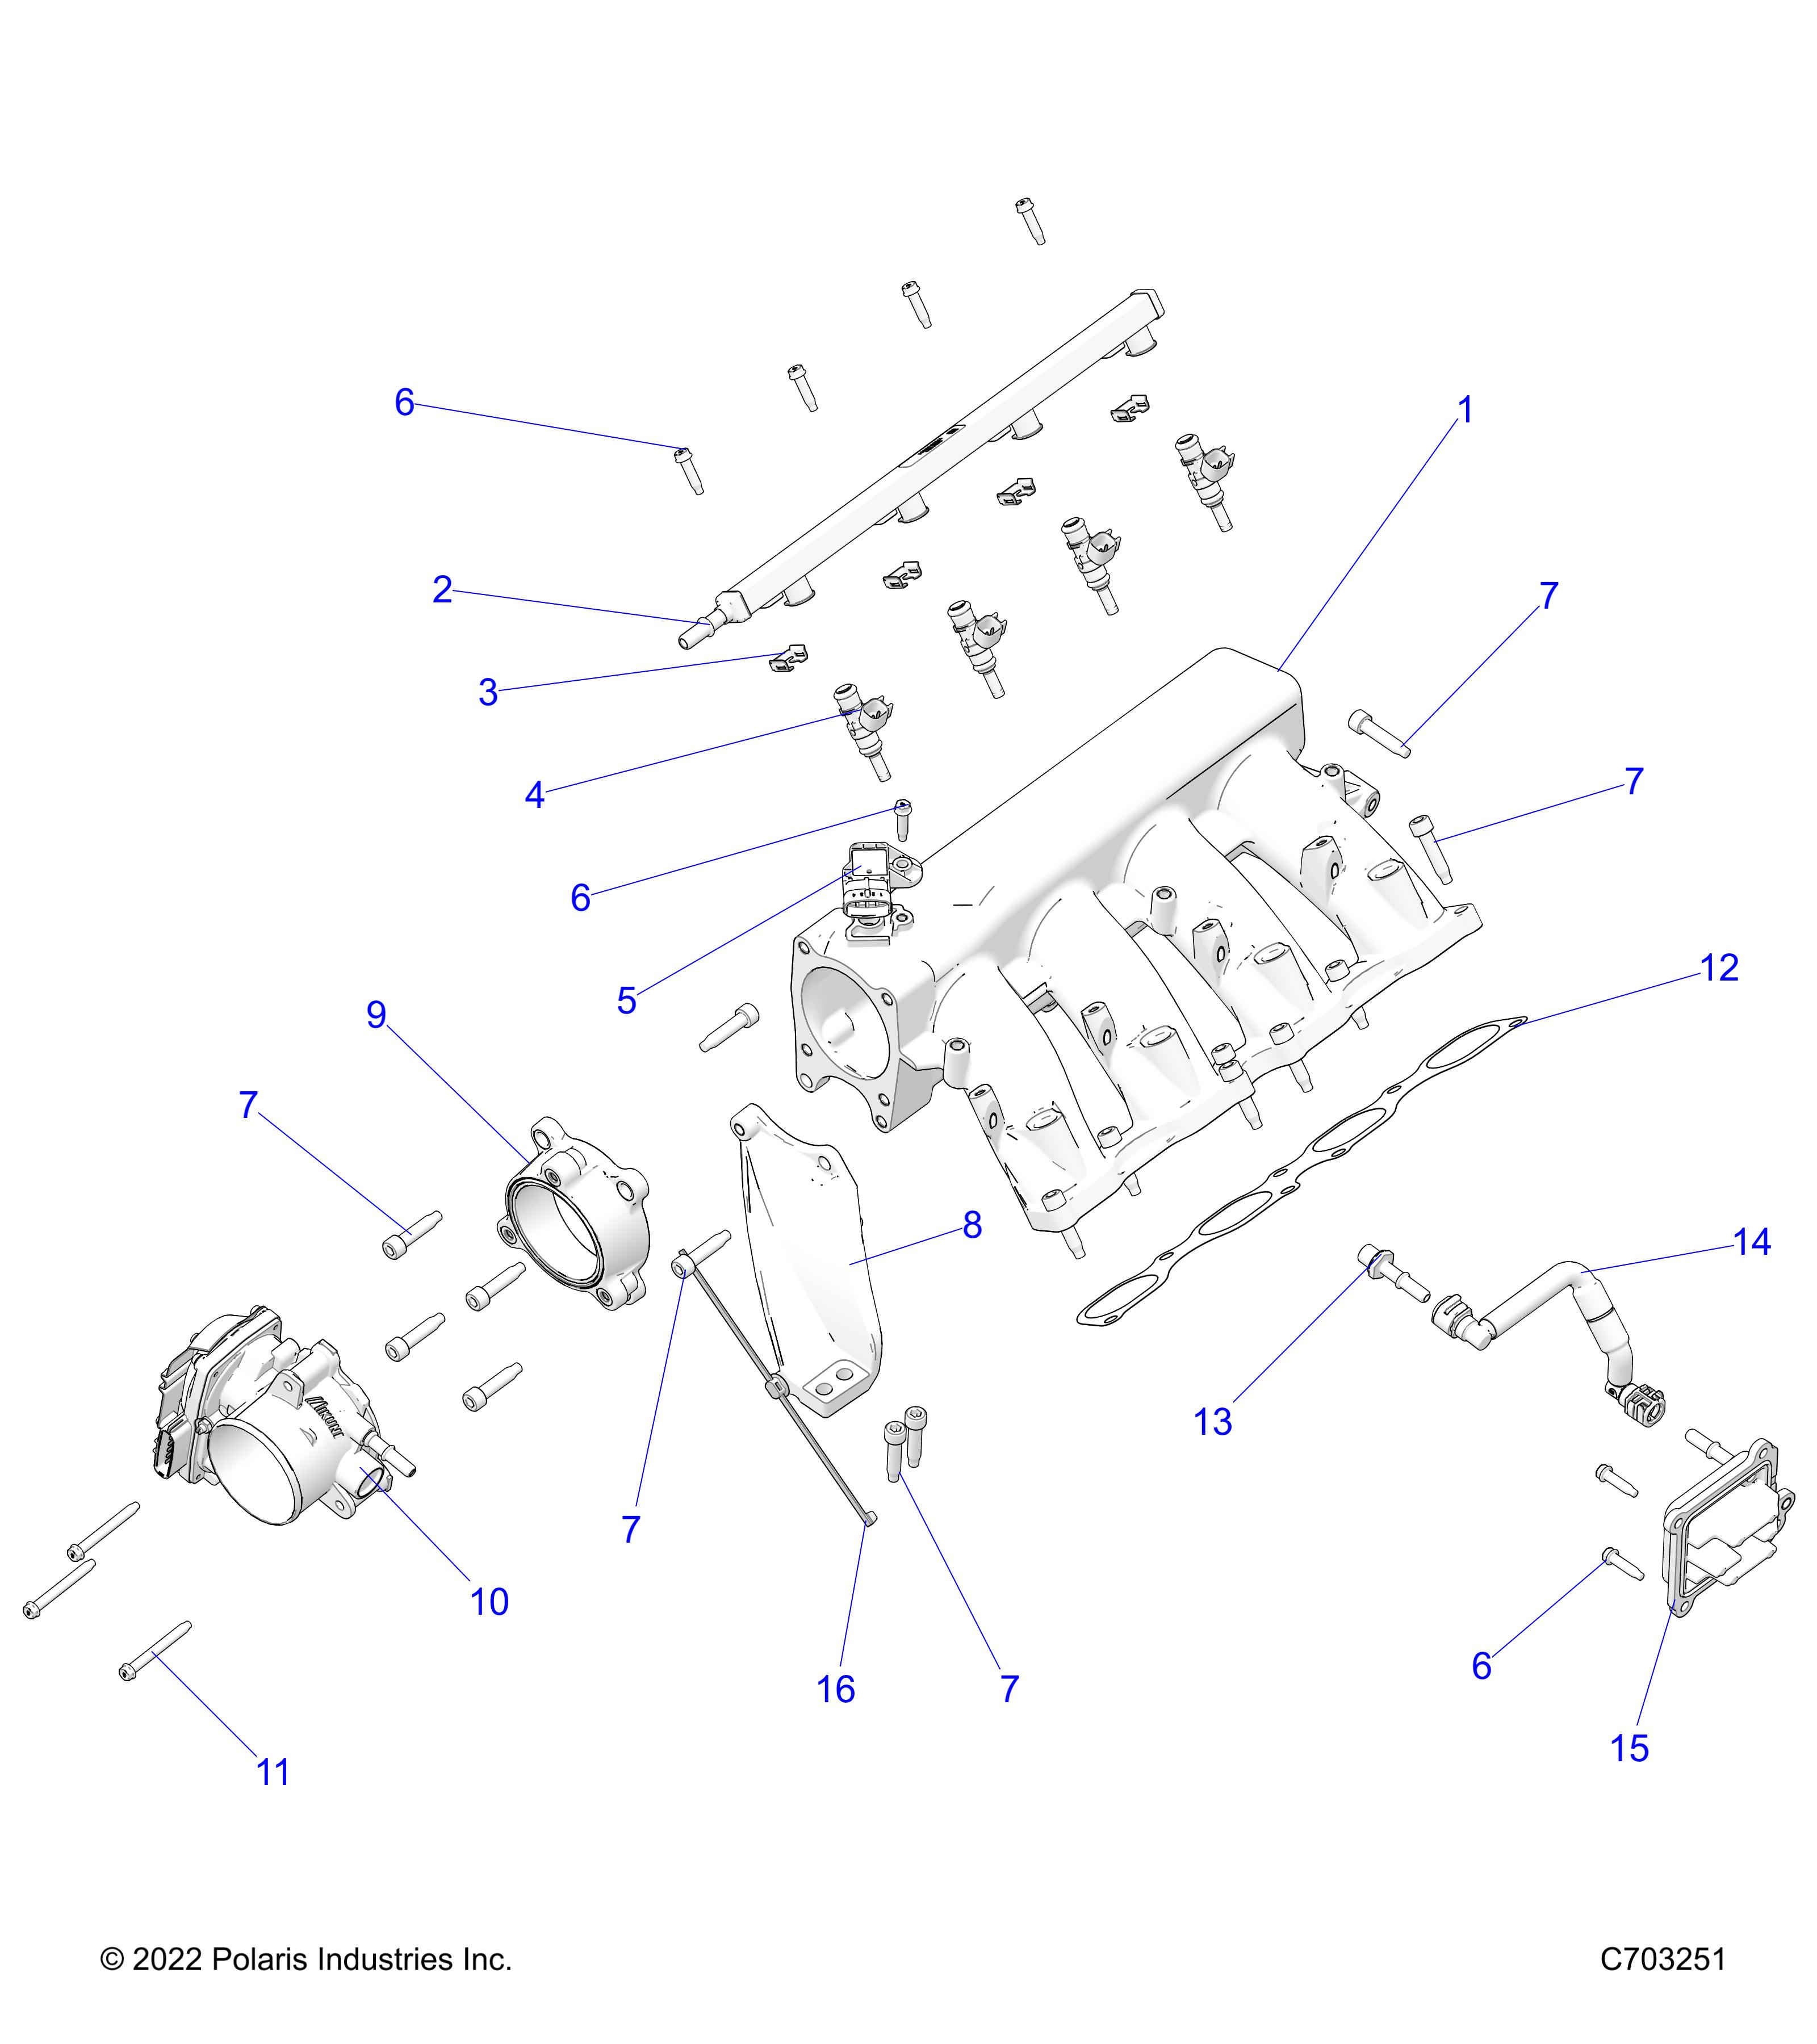 Part Number : 5144155 FITTING-PCV